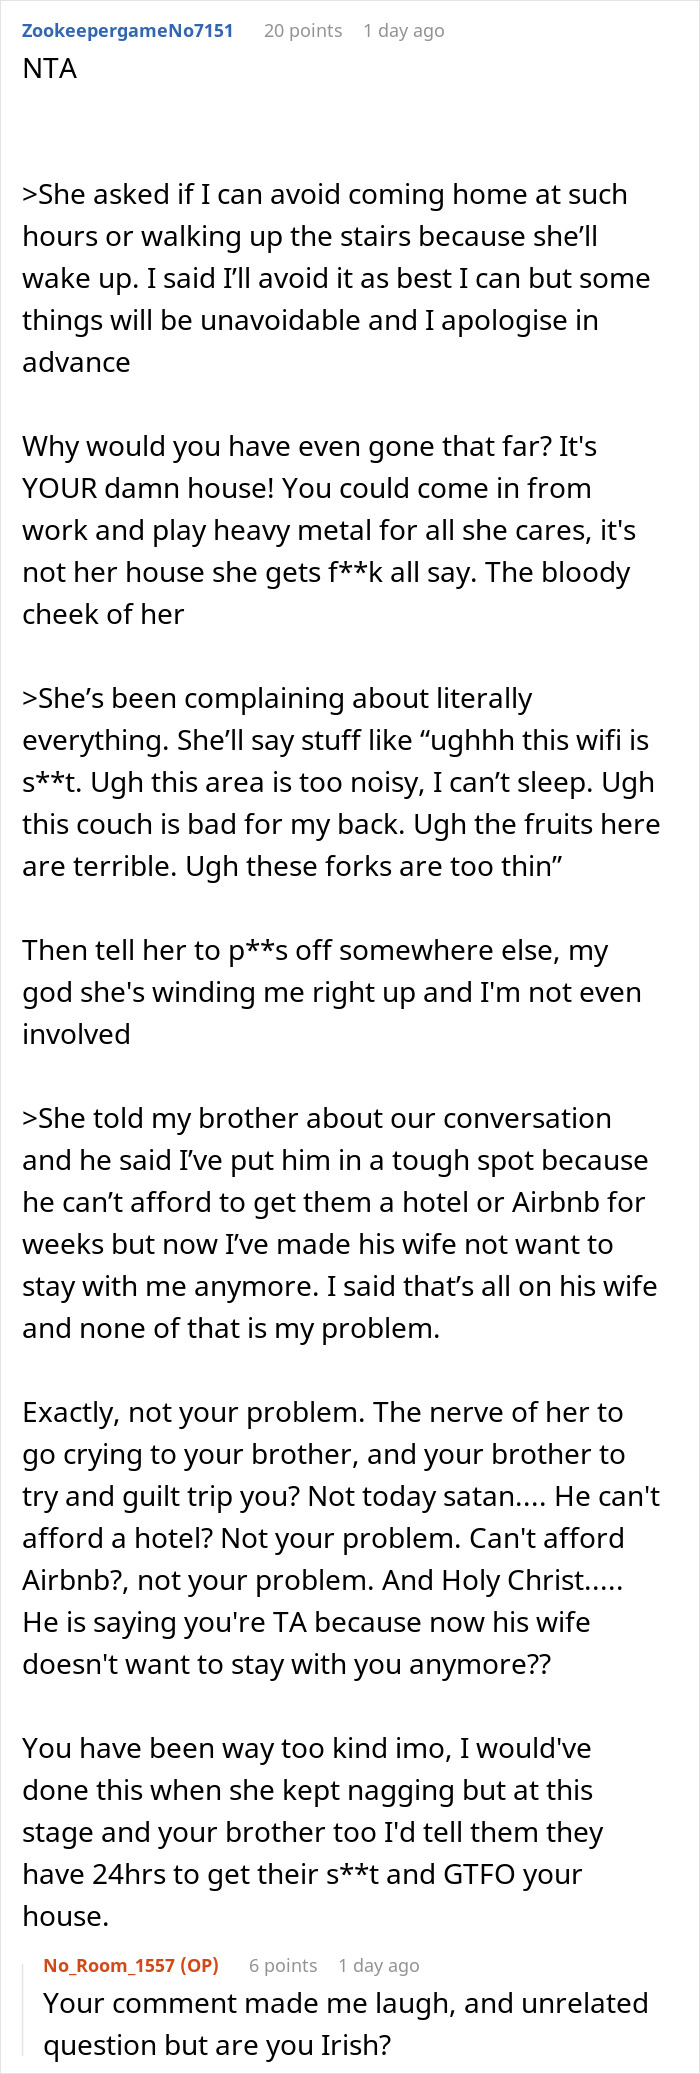 Woman Accommodates Brother’s Family At Her Place For A Month, His Wife Won’t Stop Complaining